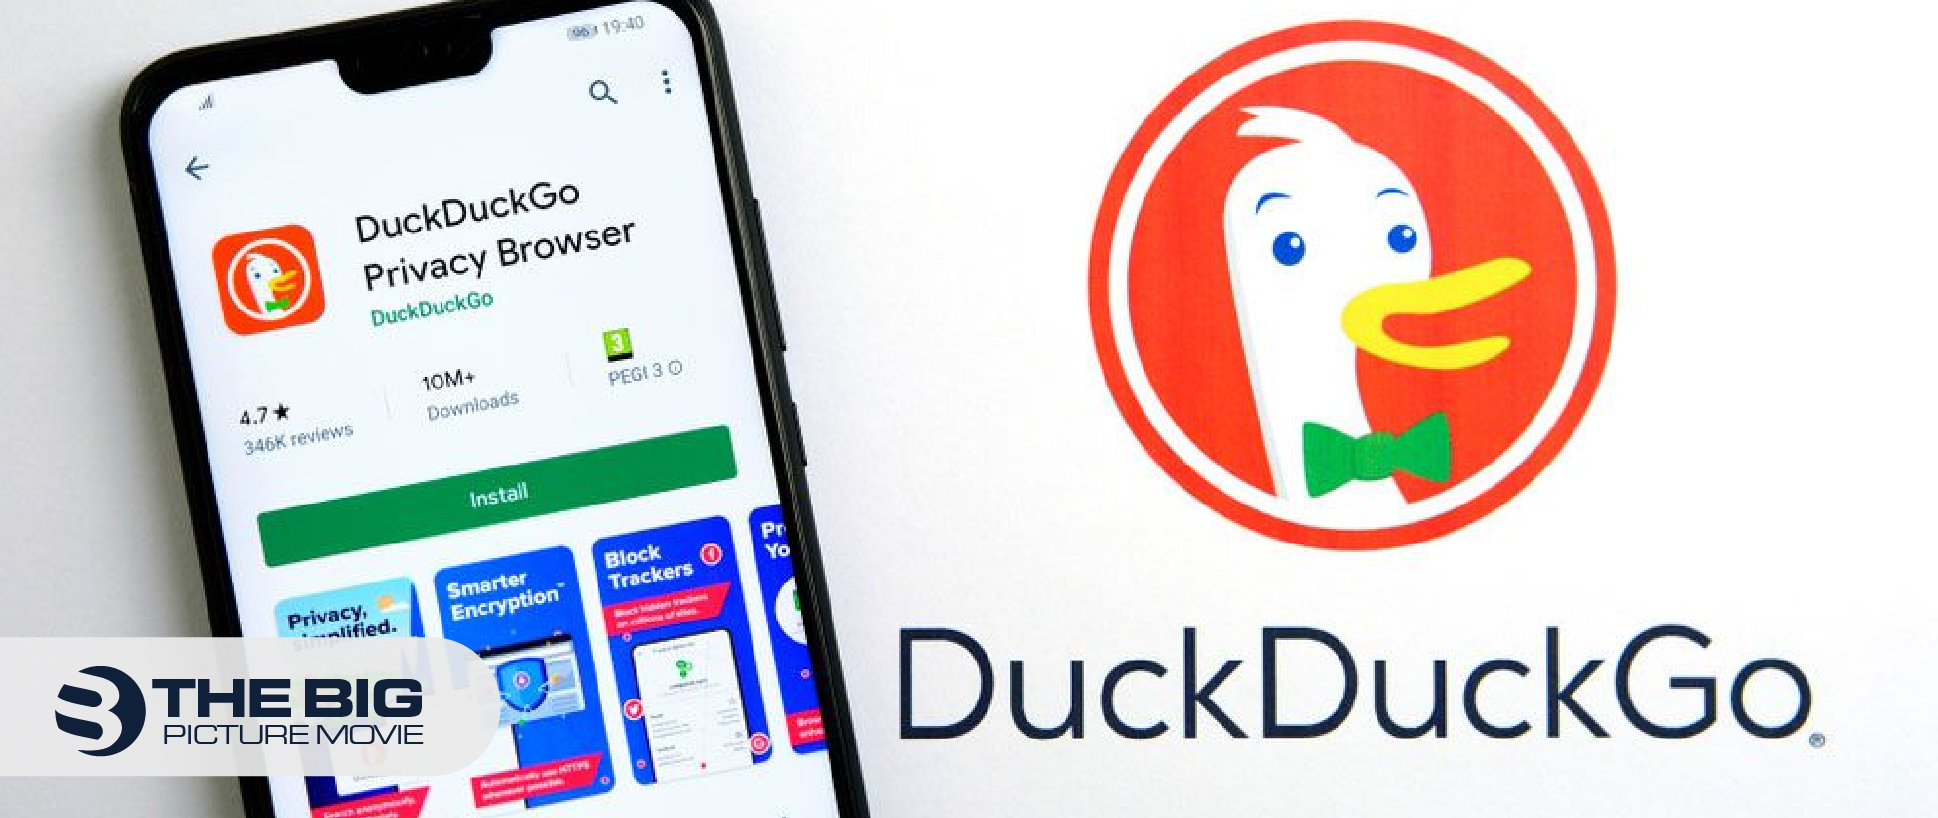  Search on Google or DuckDuckgo to find birthday